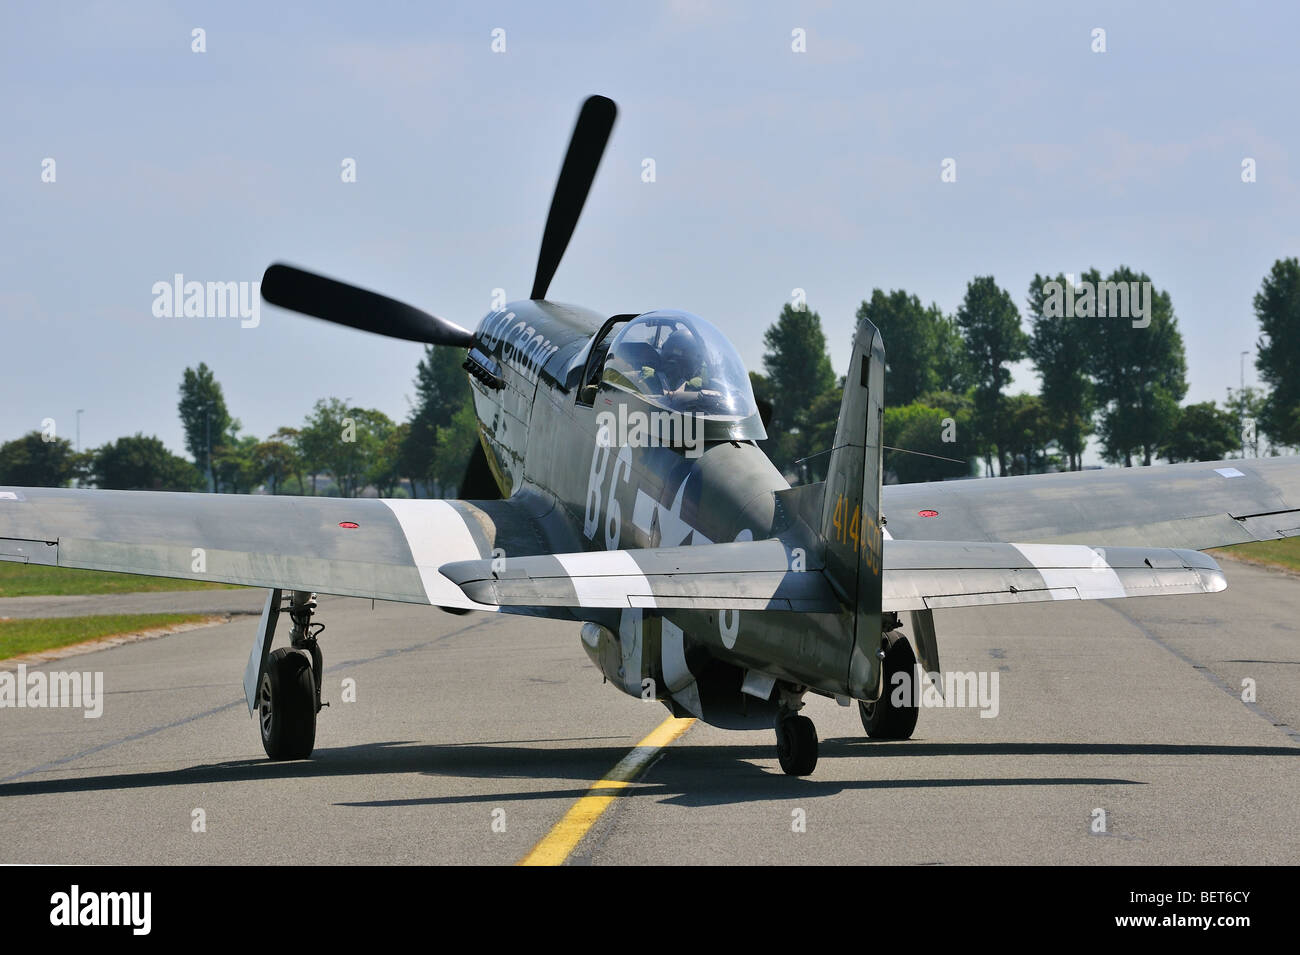 Second World War Two American P51 Mustang single-engine aircraft at airport Stock Photo